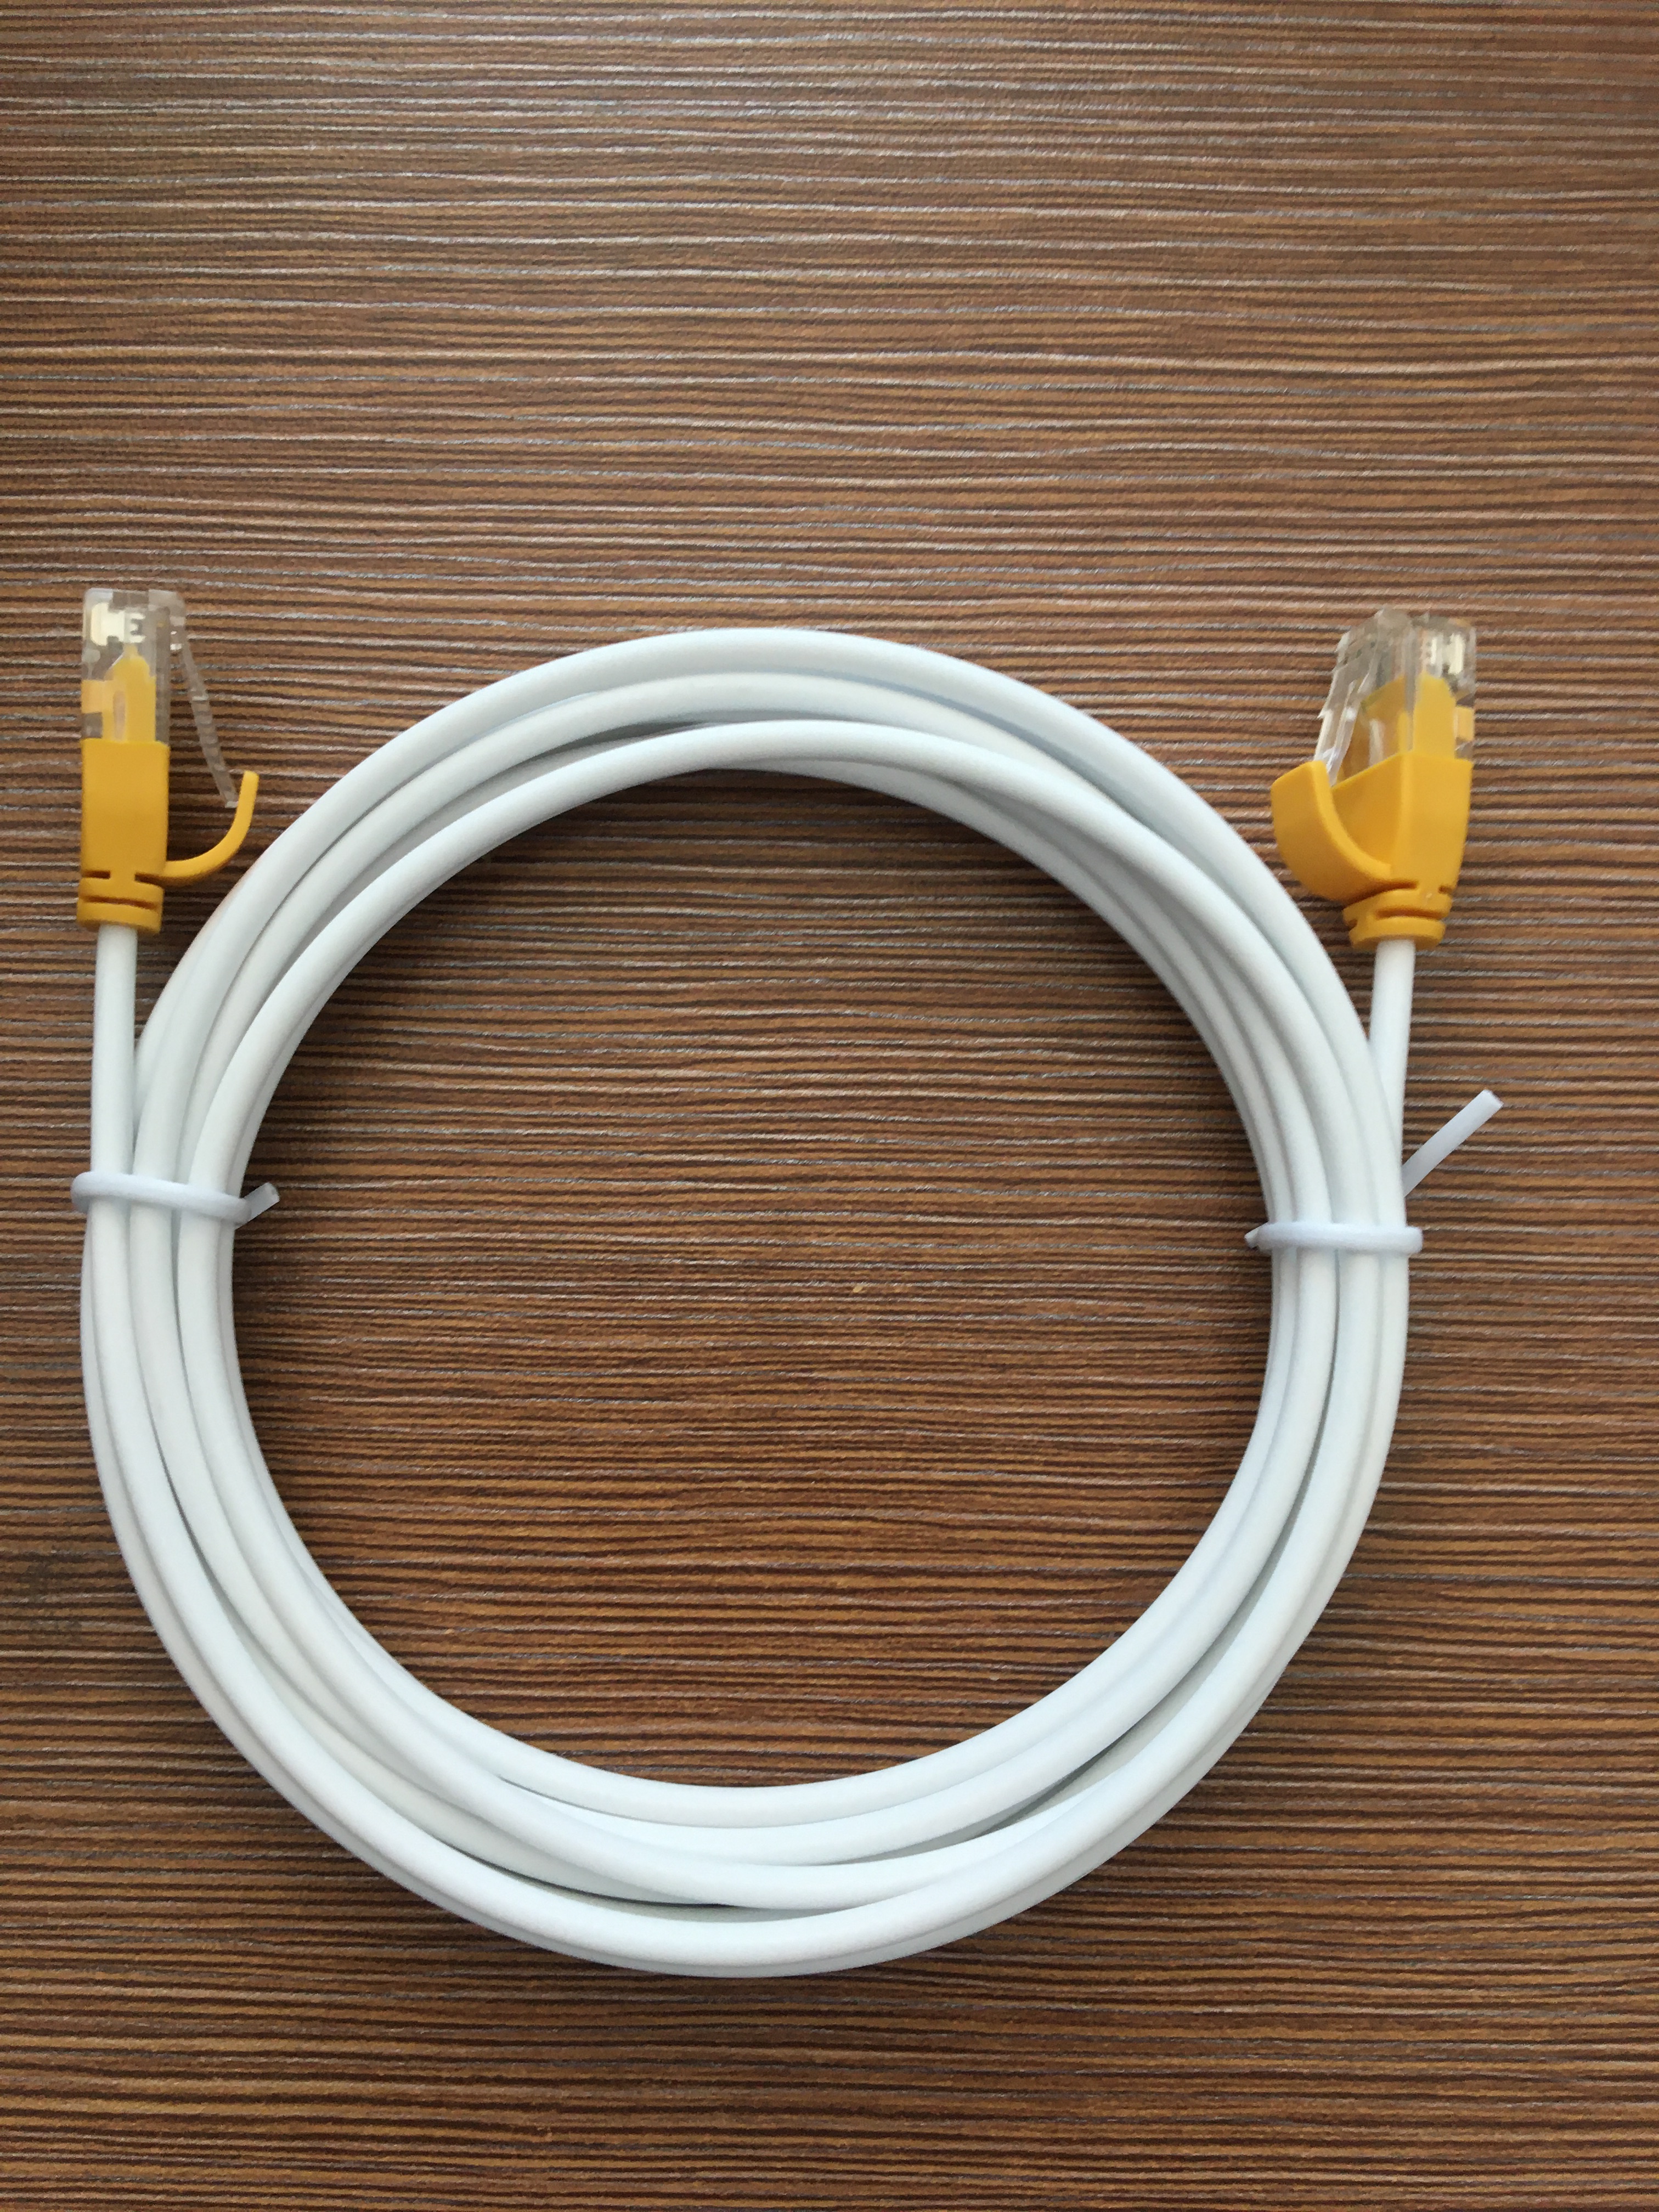 cat 8 patch cable luxurycat 8 patch metal